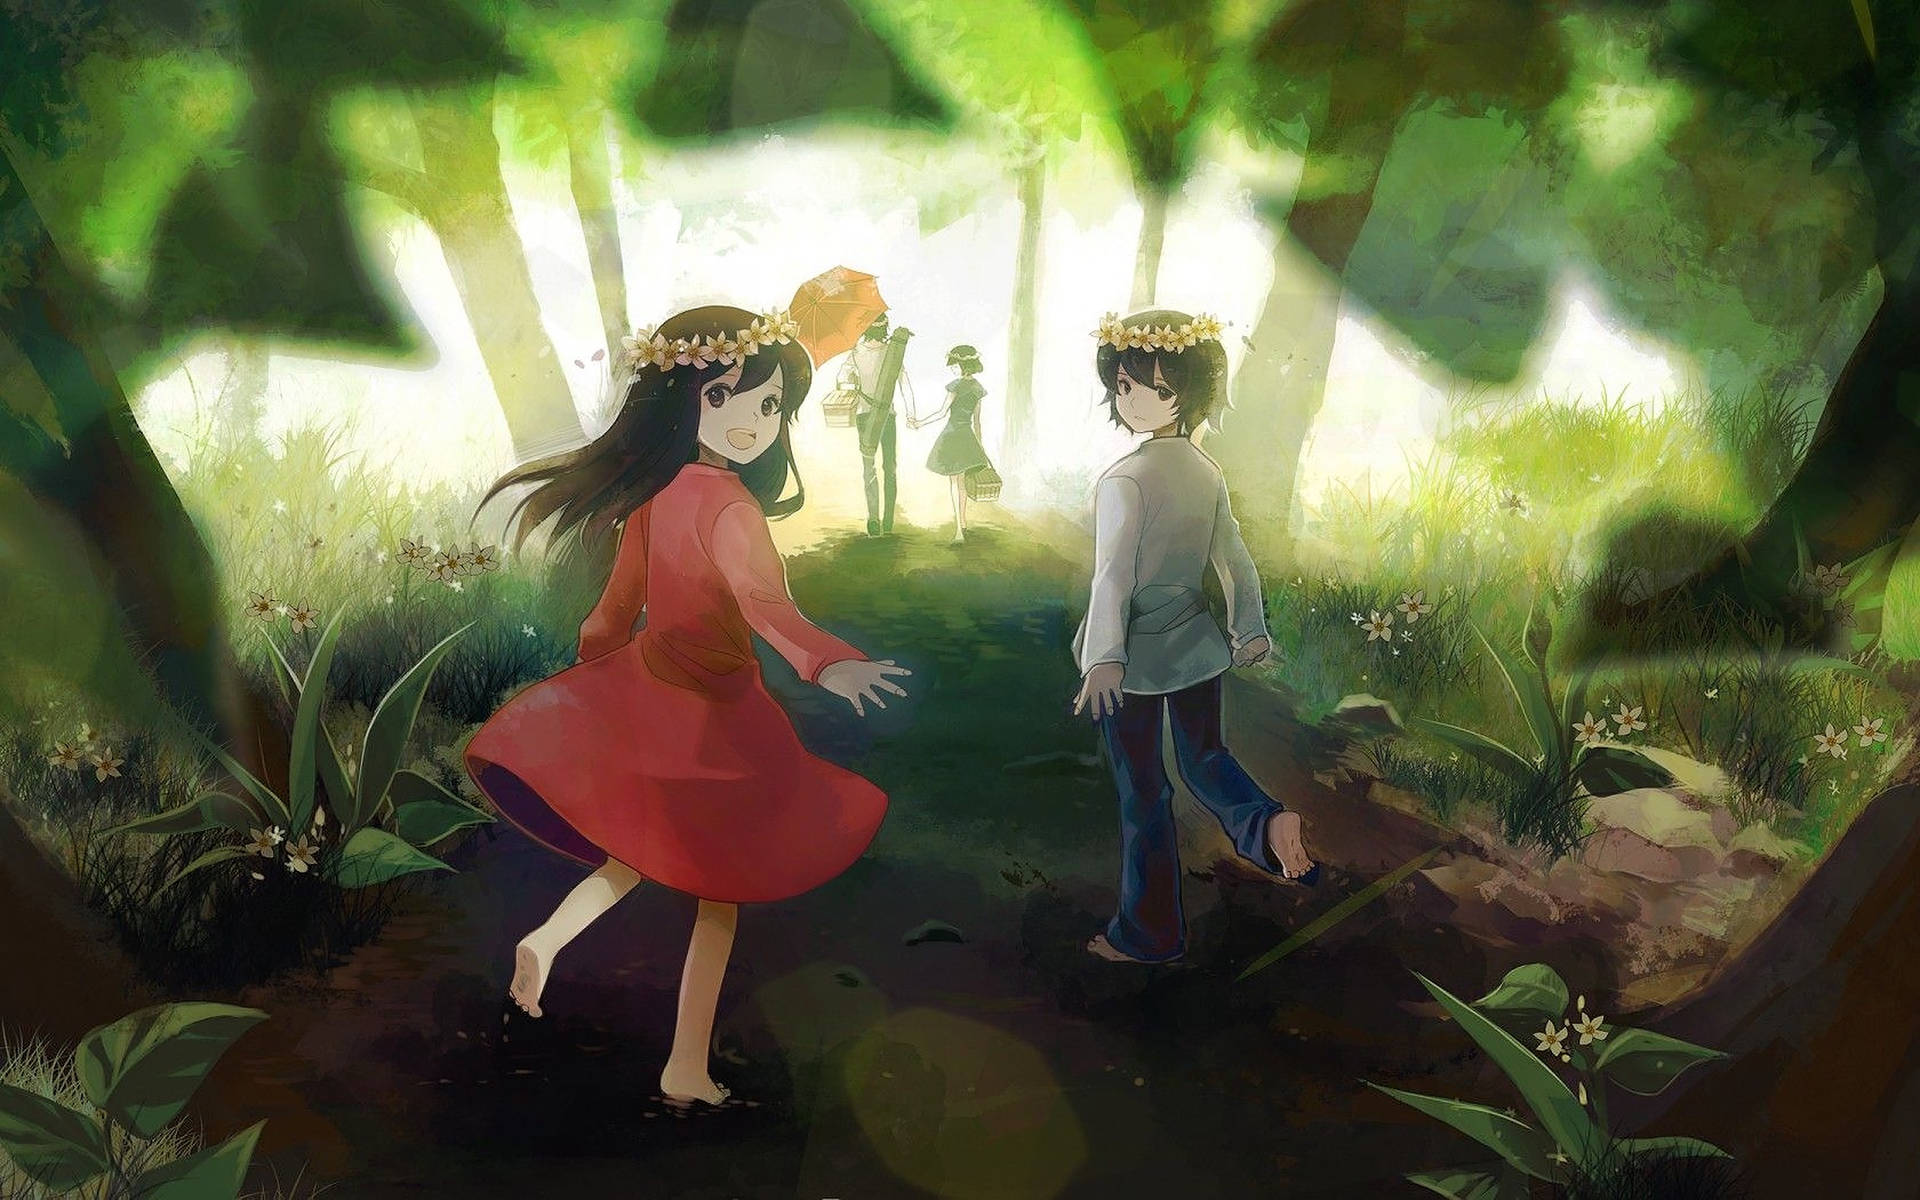 Anime Kids In The Forest Wallpaper